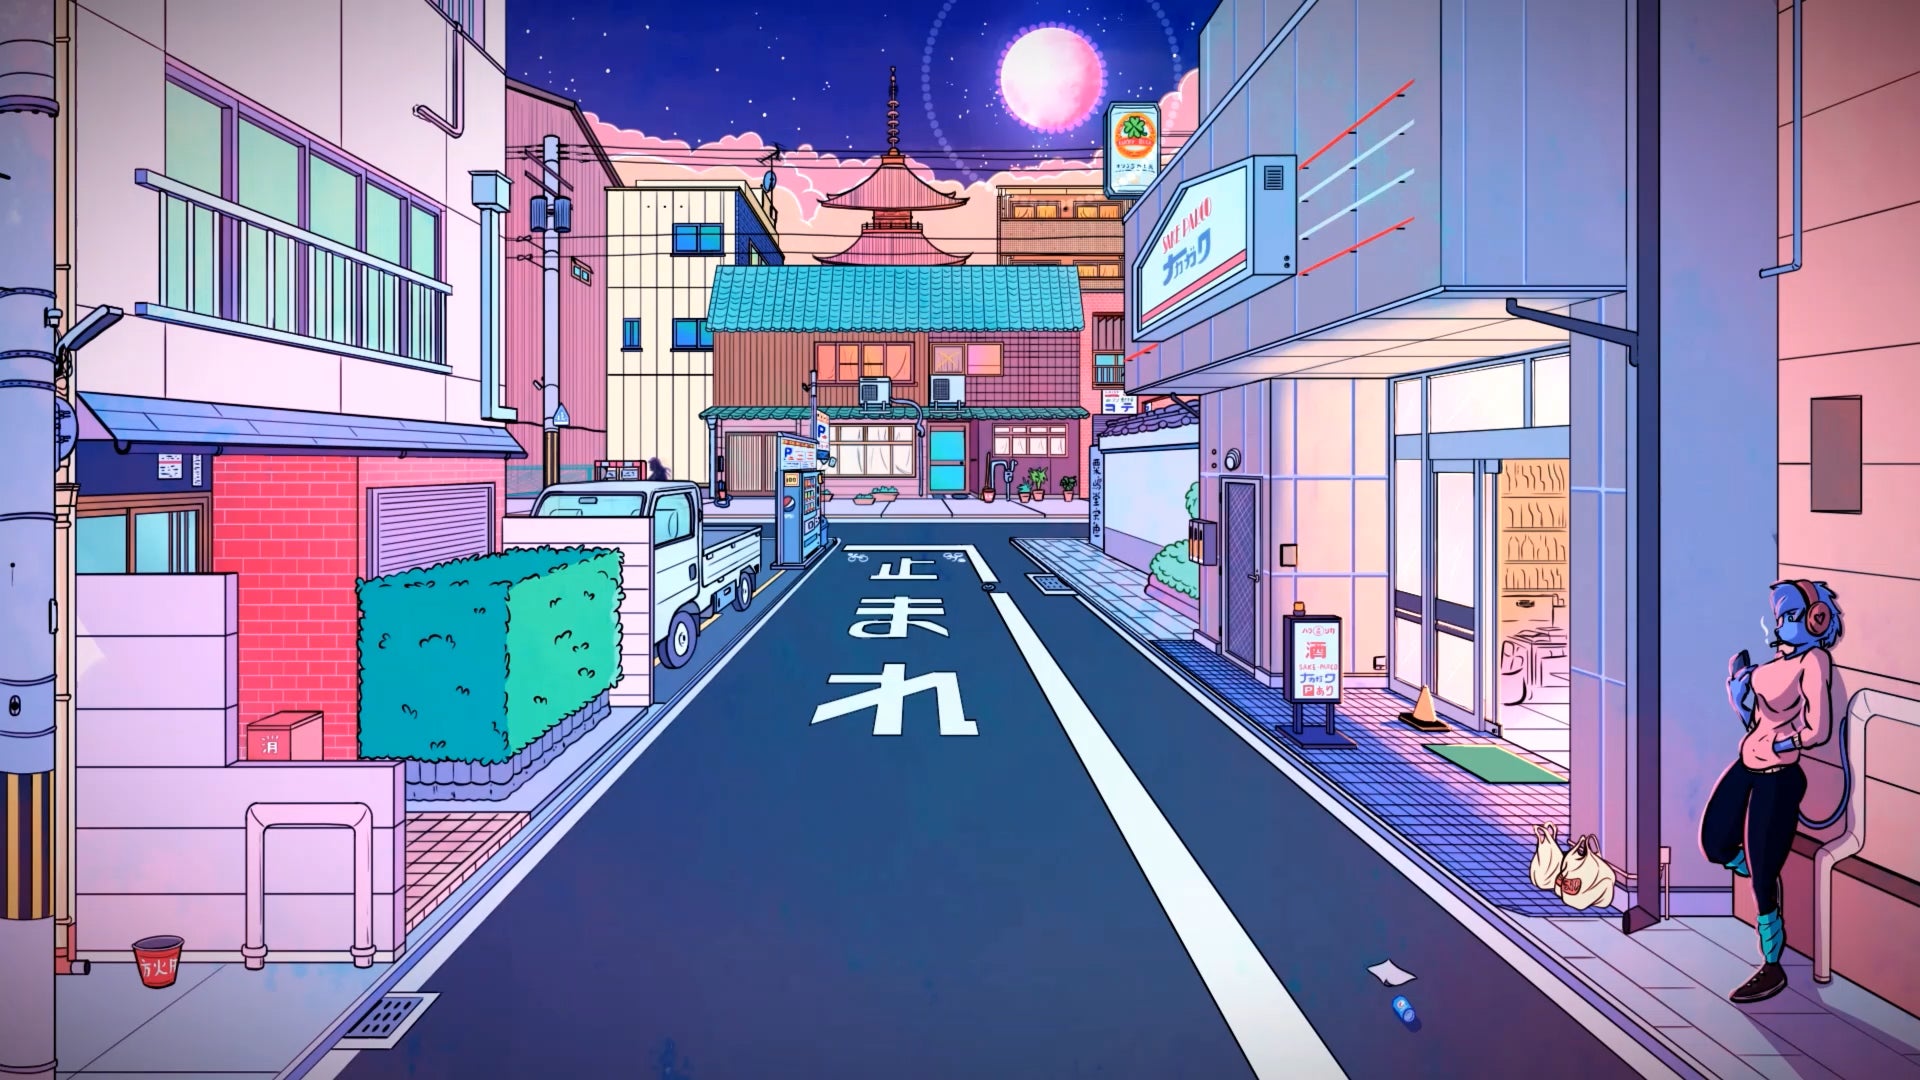 Made A Lil Animation Music Project Inspired By The Higashiyama